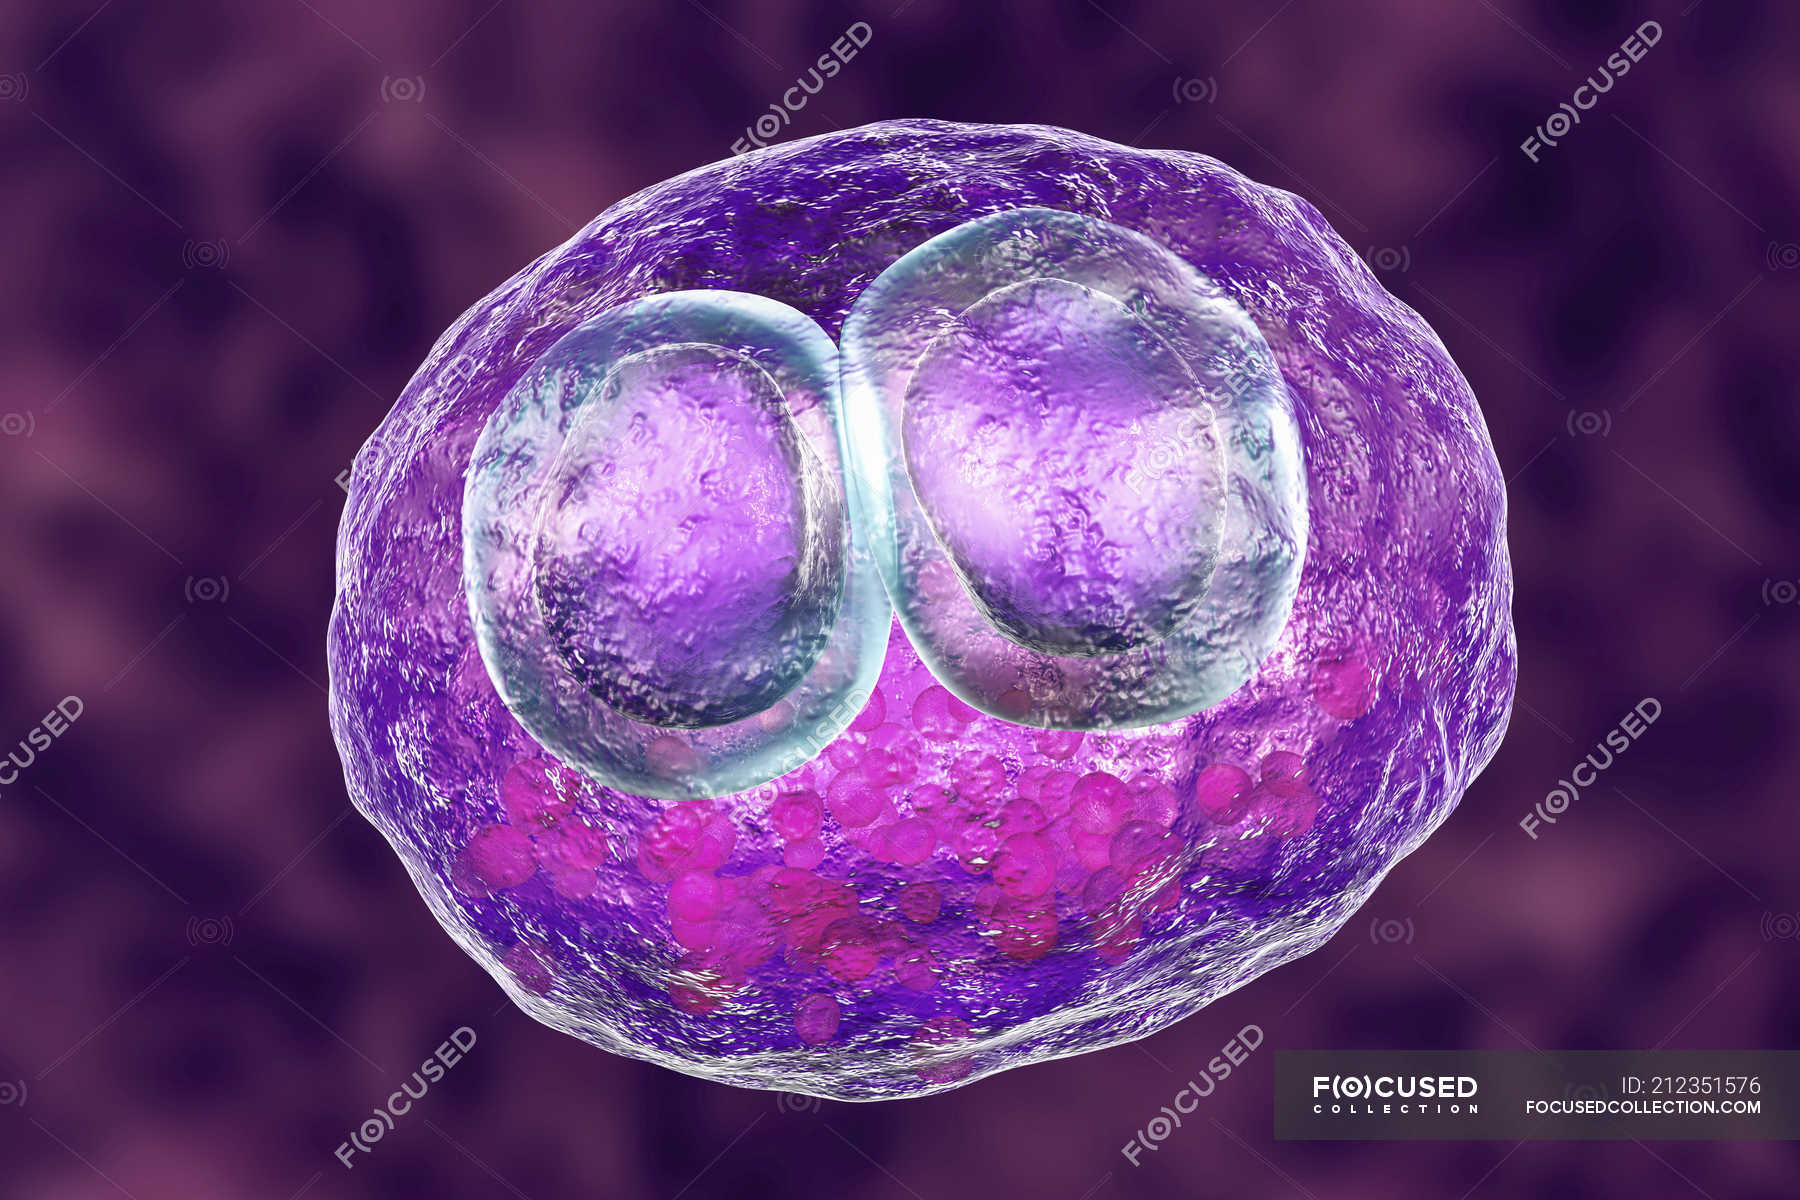 Digital artwork of human cell with cytomegalic inclusion disease symptom of  cytomegalovirus infection. — condition, lung infection - Stock Photo |  #212351576